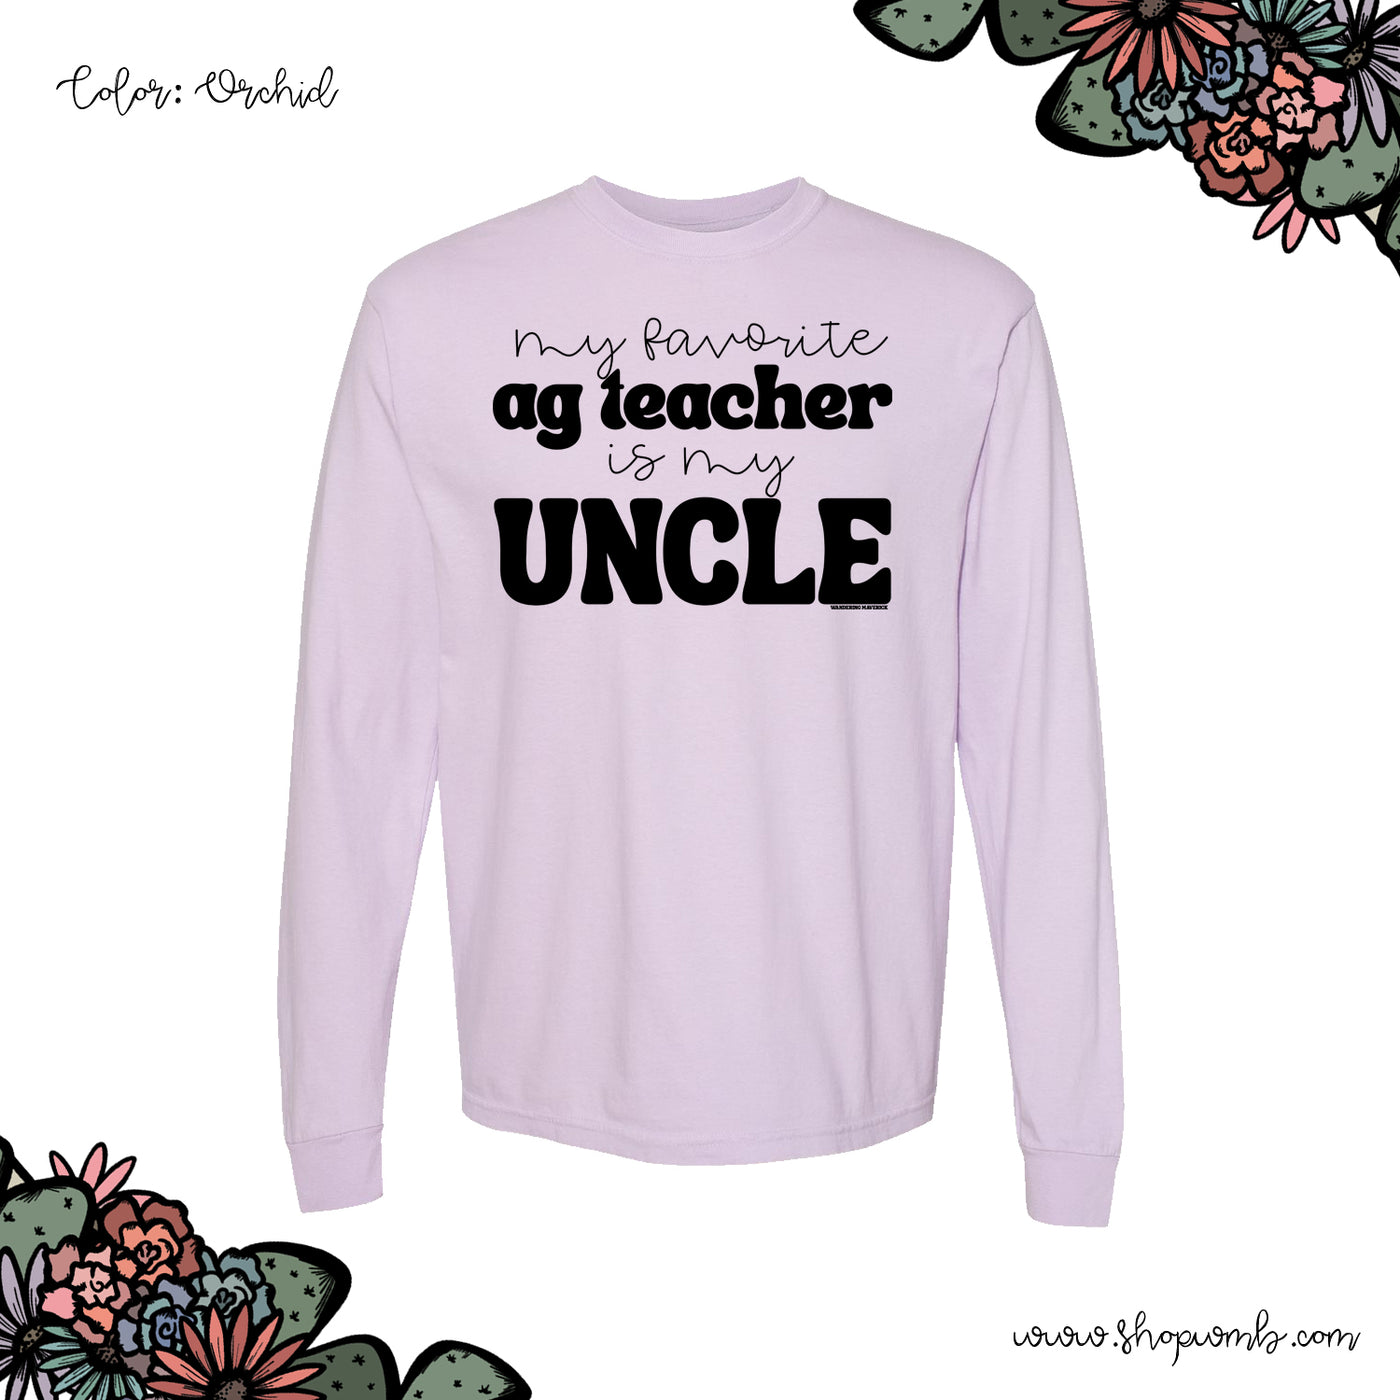 My Favorite Ag Teacher Is My Uncle LONG SLEEVE T-Shirt (S-3XL) - Multiple Colors!